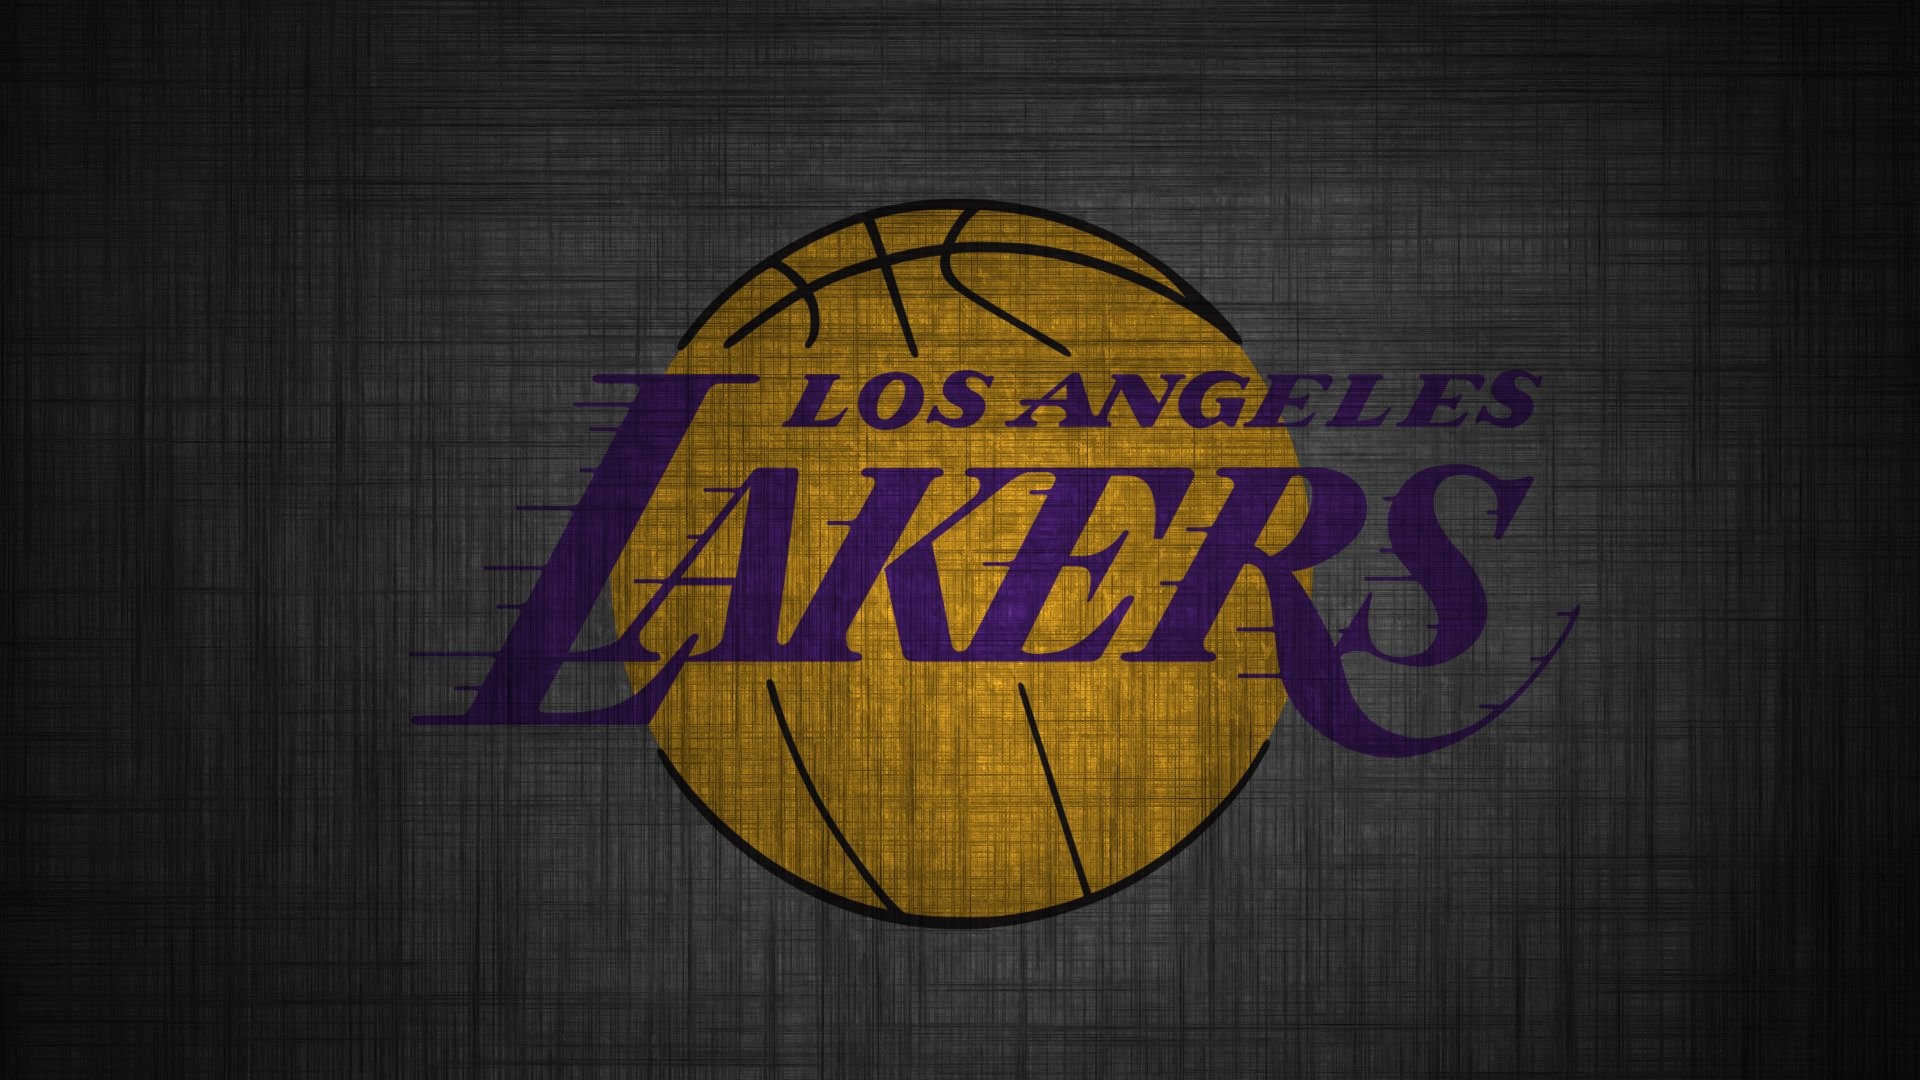 1920x1080 Lakers Wallpapers and Infographics Los Angeles Lakers 1500Ã500 Lakers  Wallpaper (43 Wallpapers) | Adorable Wallpapers | Desktop | Pinterest |  Lakers ...